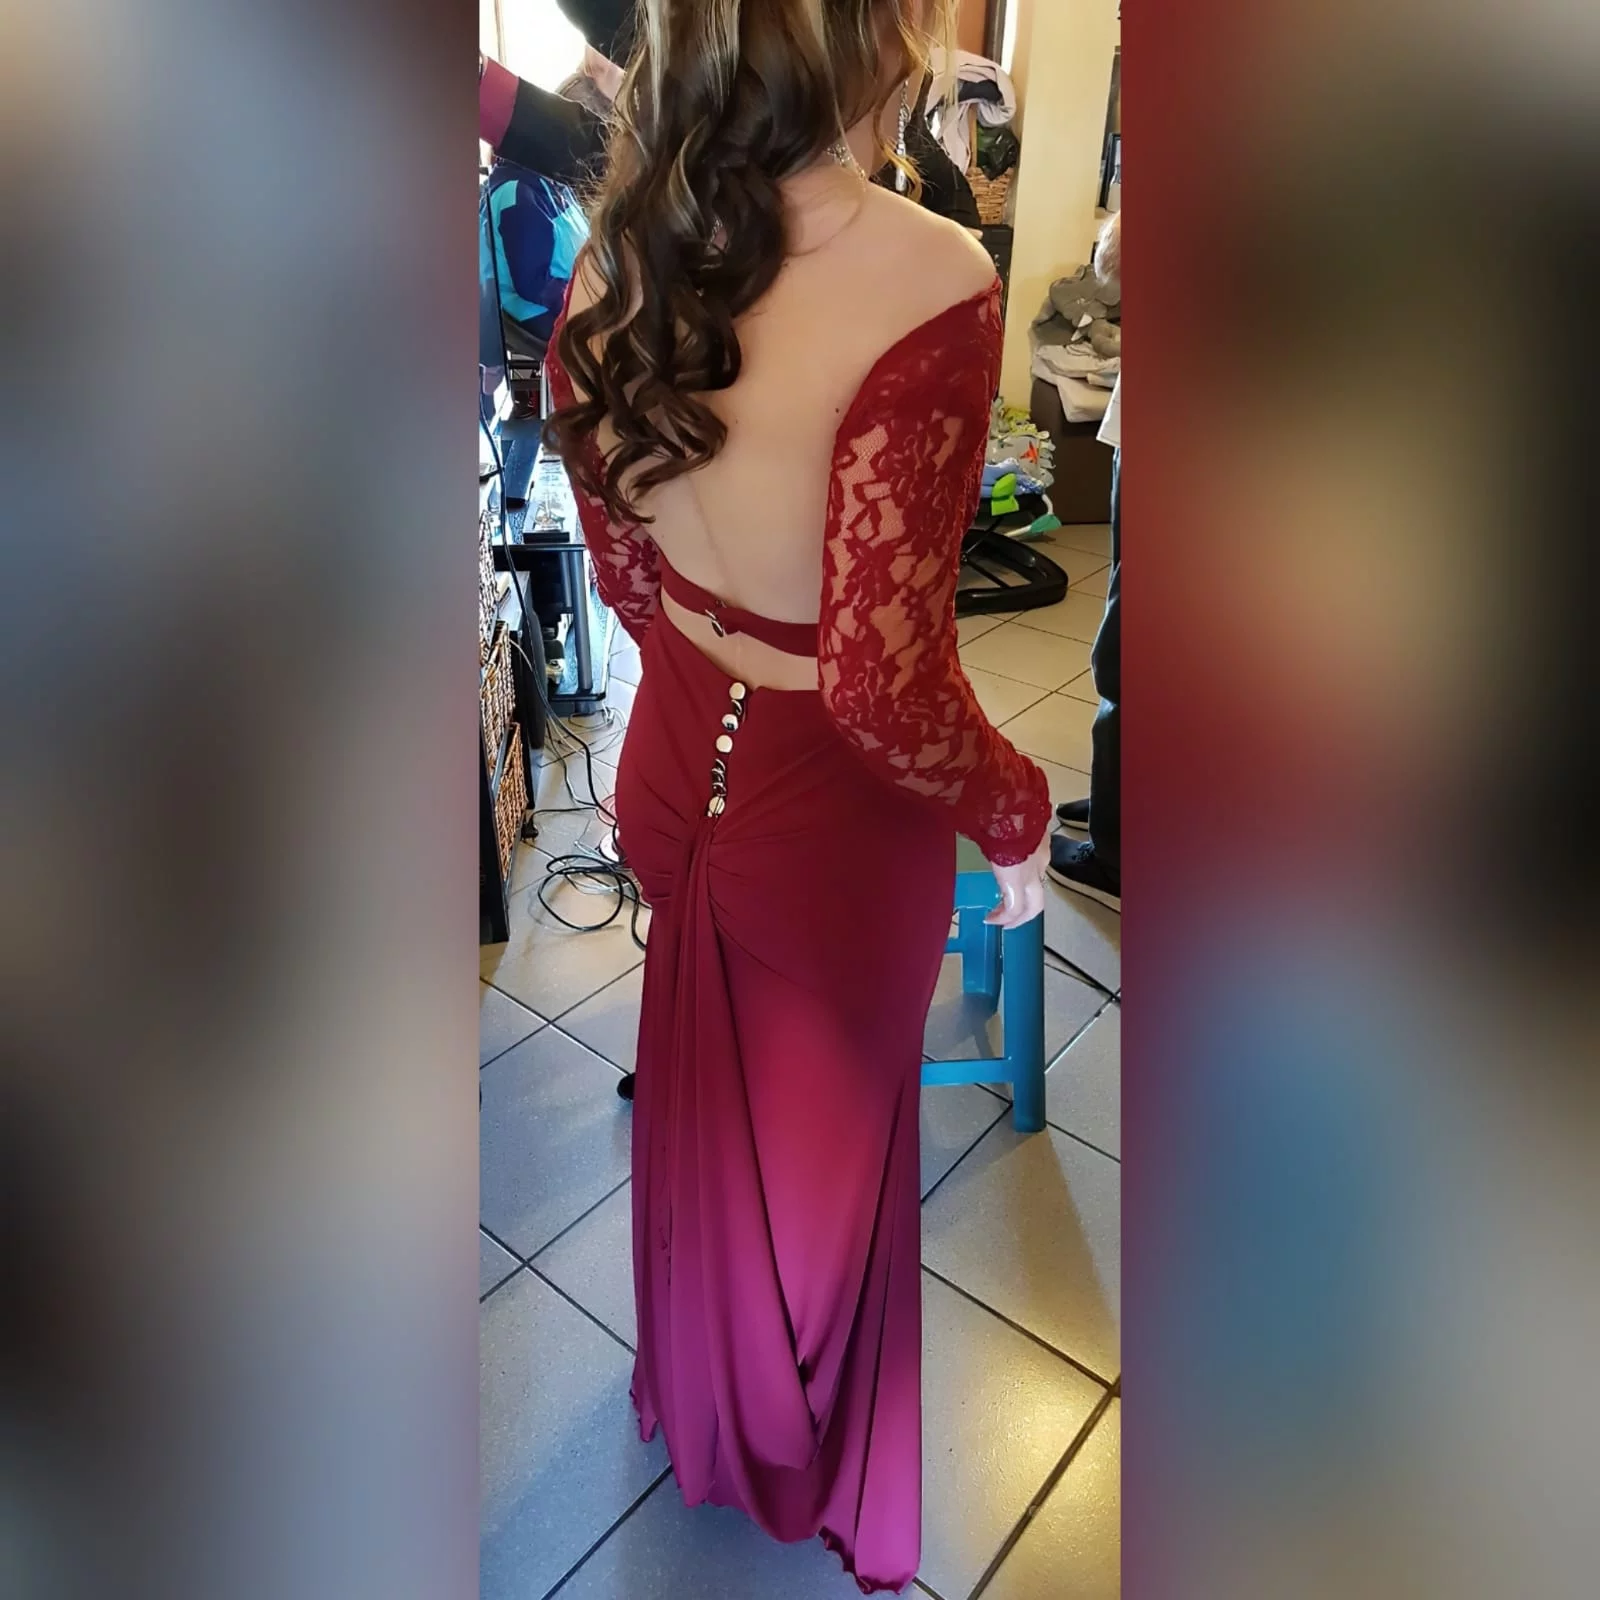 Red long sheer lace bodice matric dance dress 1 red long sheer lace bodice matric dance dress. Long off the shoulder lace sleeves with a rounded open back, slit and train.